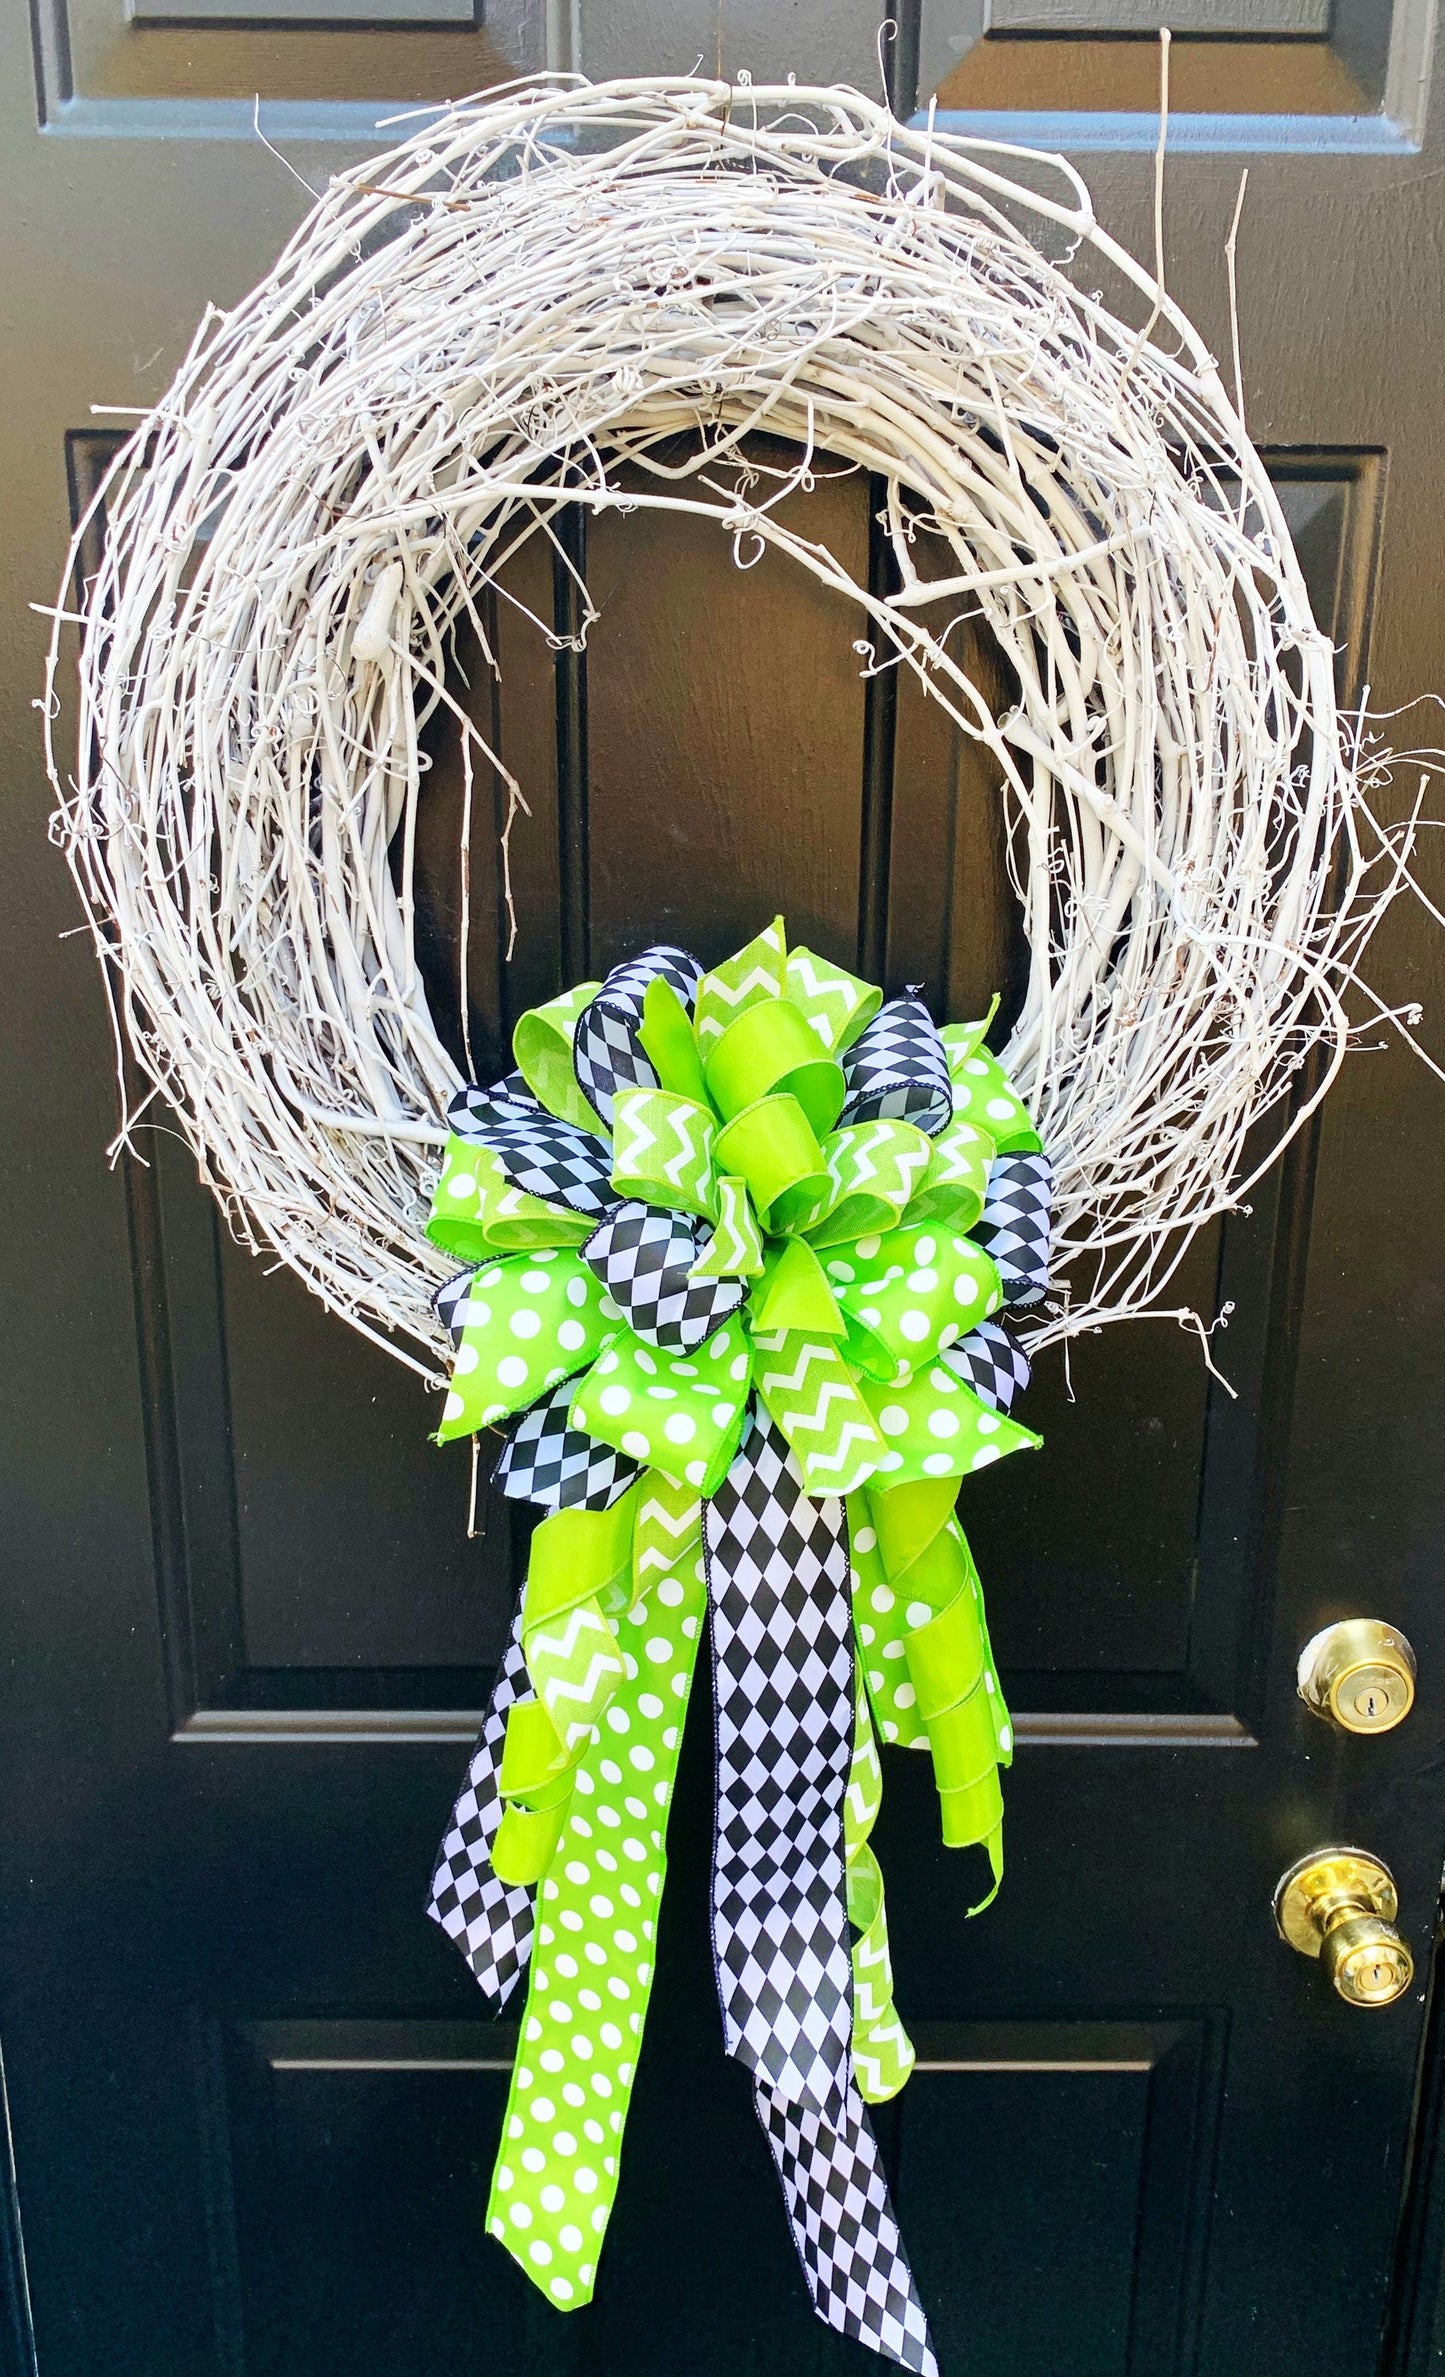 Everyday Collection - Green/Black Bow, Green Bow, Black Bow, Mailbox Bow, Wreath Bow, Large Bow, Gift, Gift Bow, Bows, Ribbon Bow